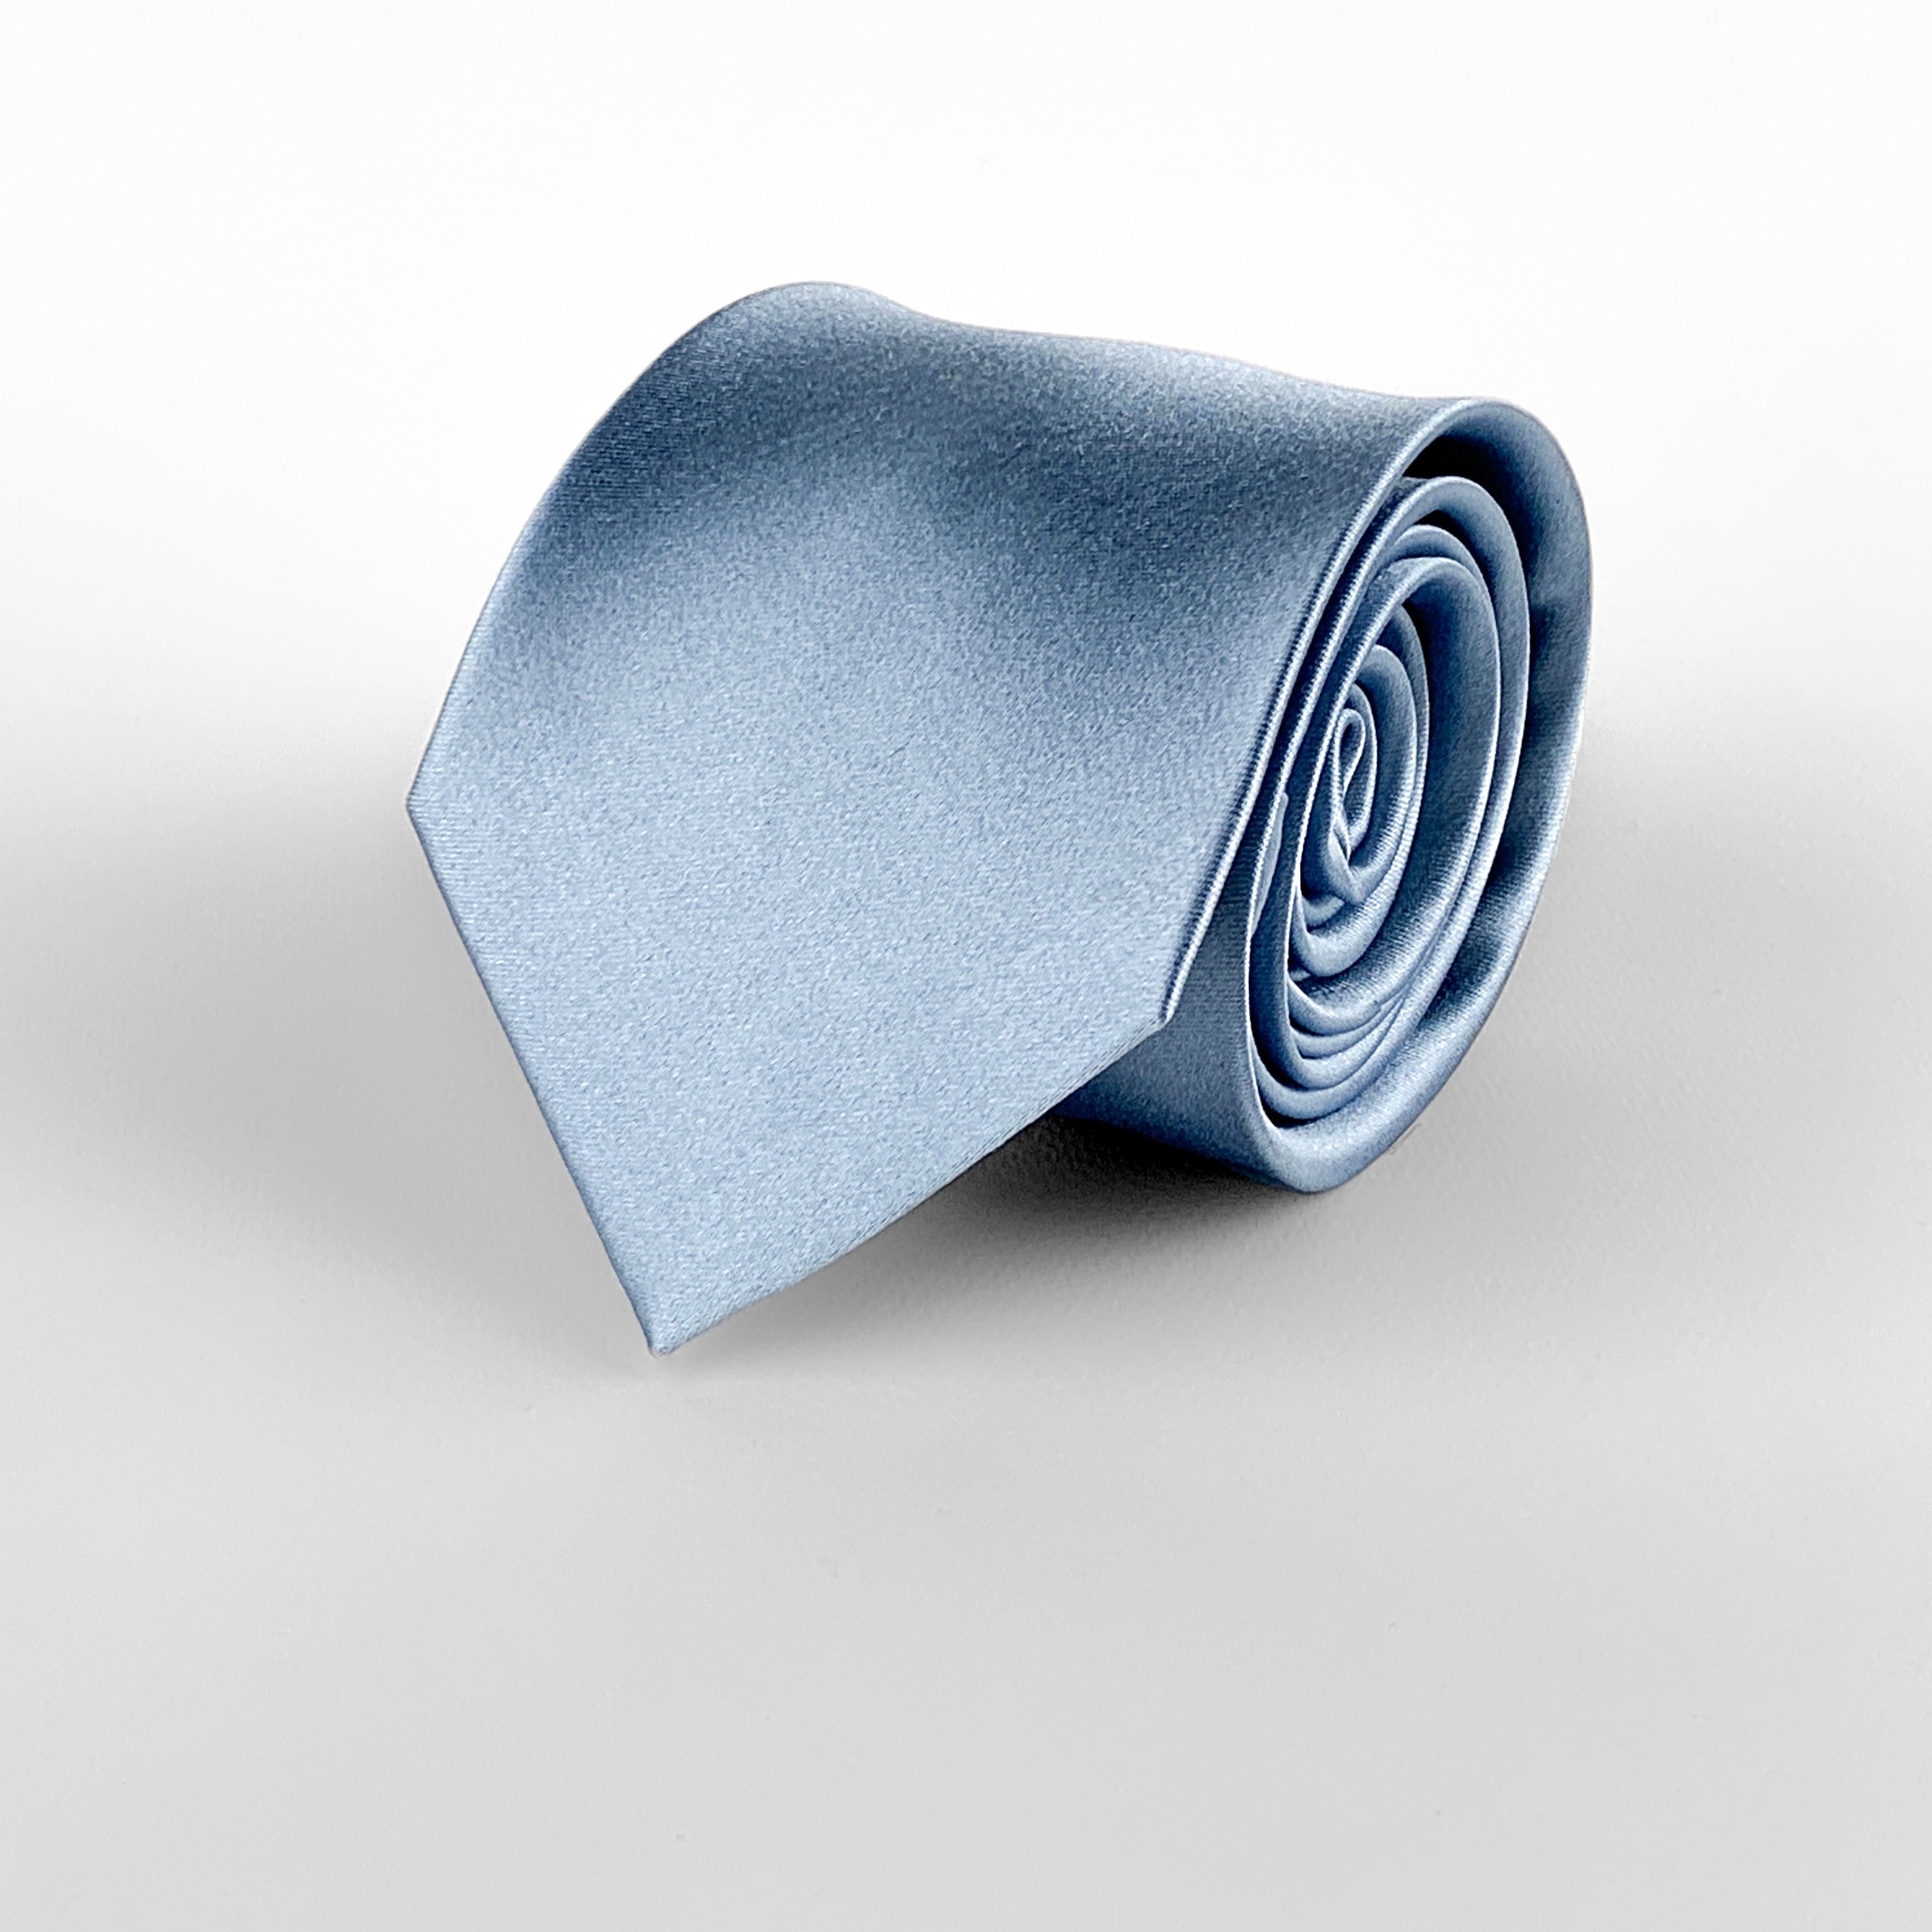 Ice blue mulberry silk satin tie rolled and placed on a white background